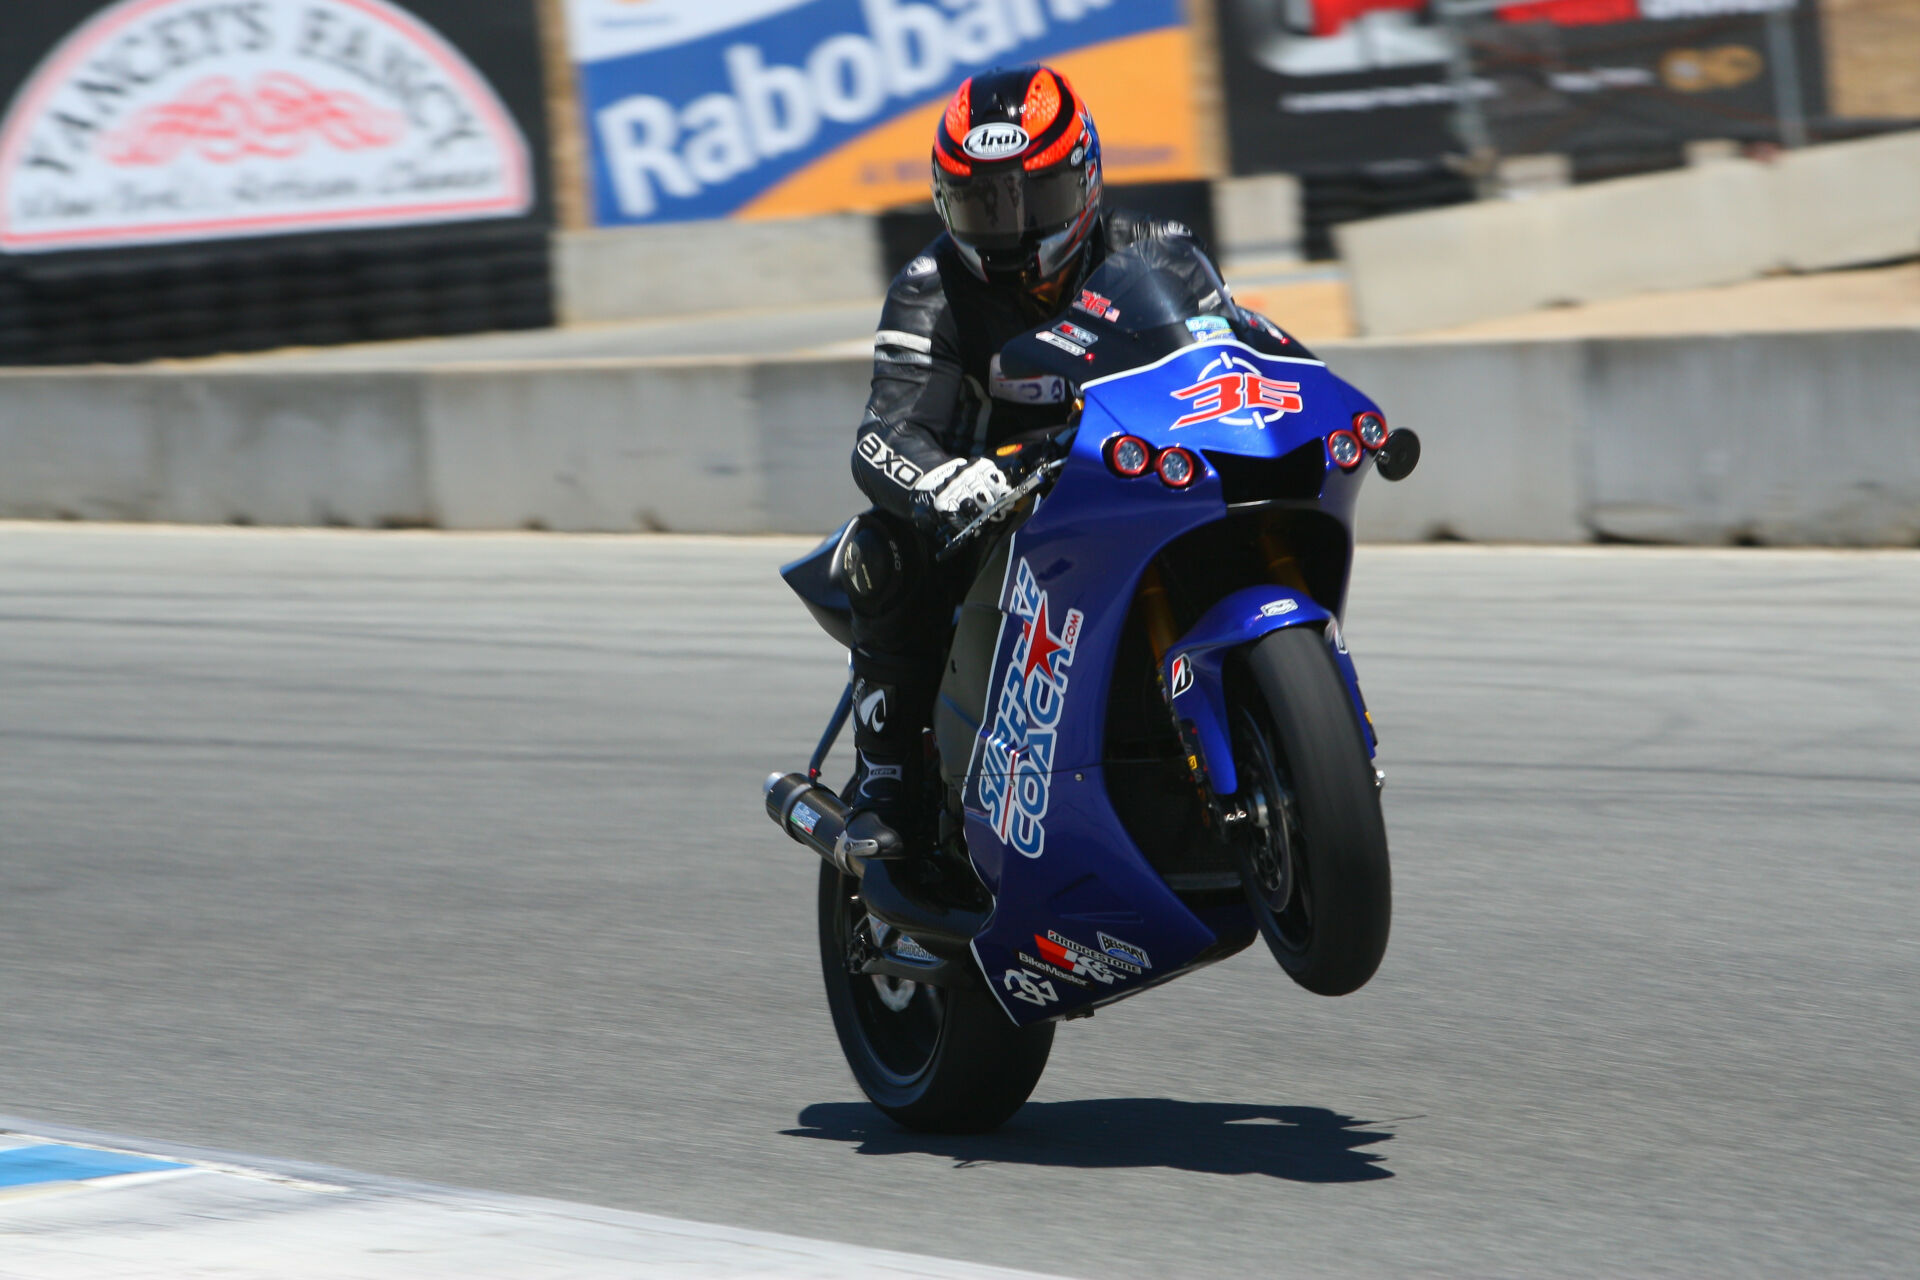 Superbike Coach Corp. owner Can Akkaya (36) during one of his events at Laguna Seca. Photo courtesy Superbike Coach Corp.